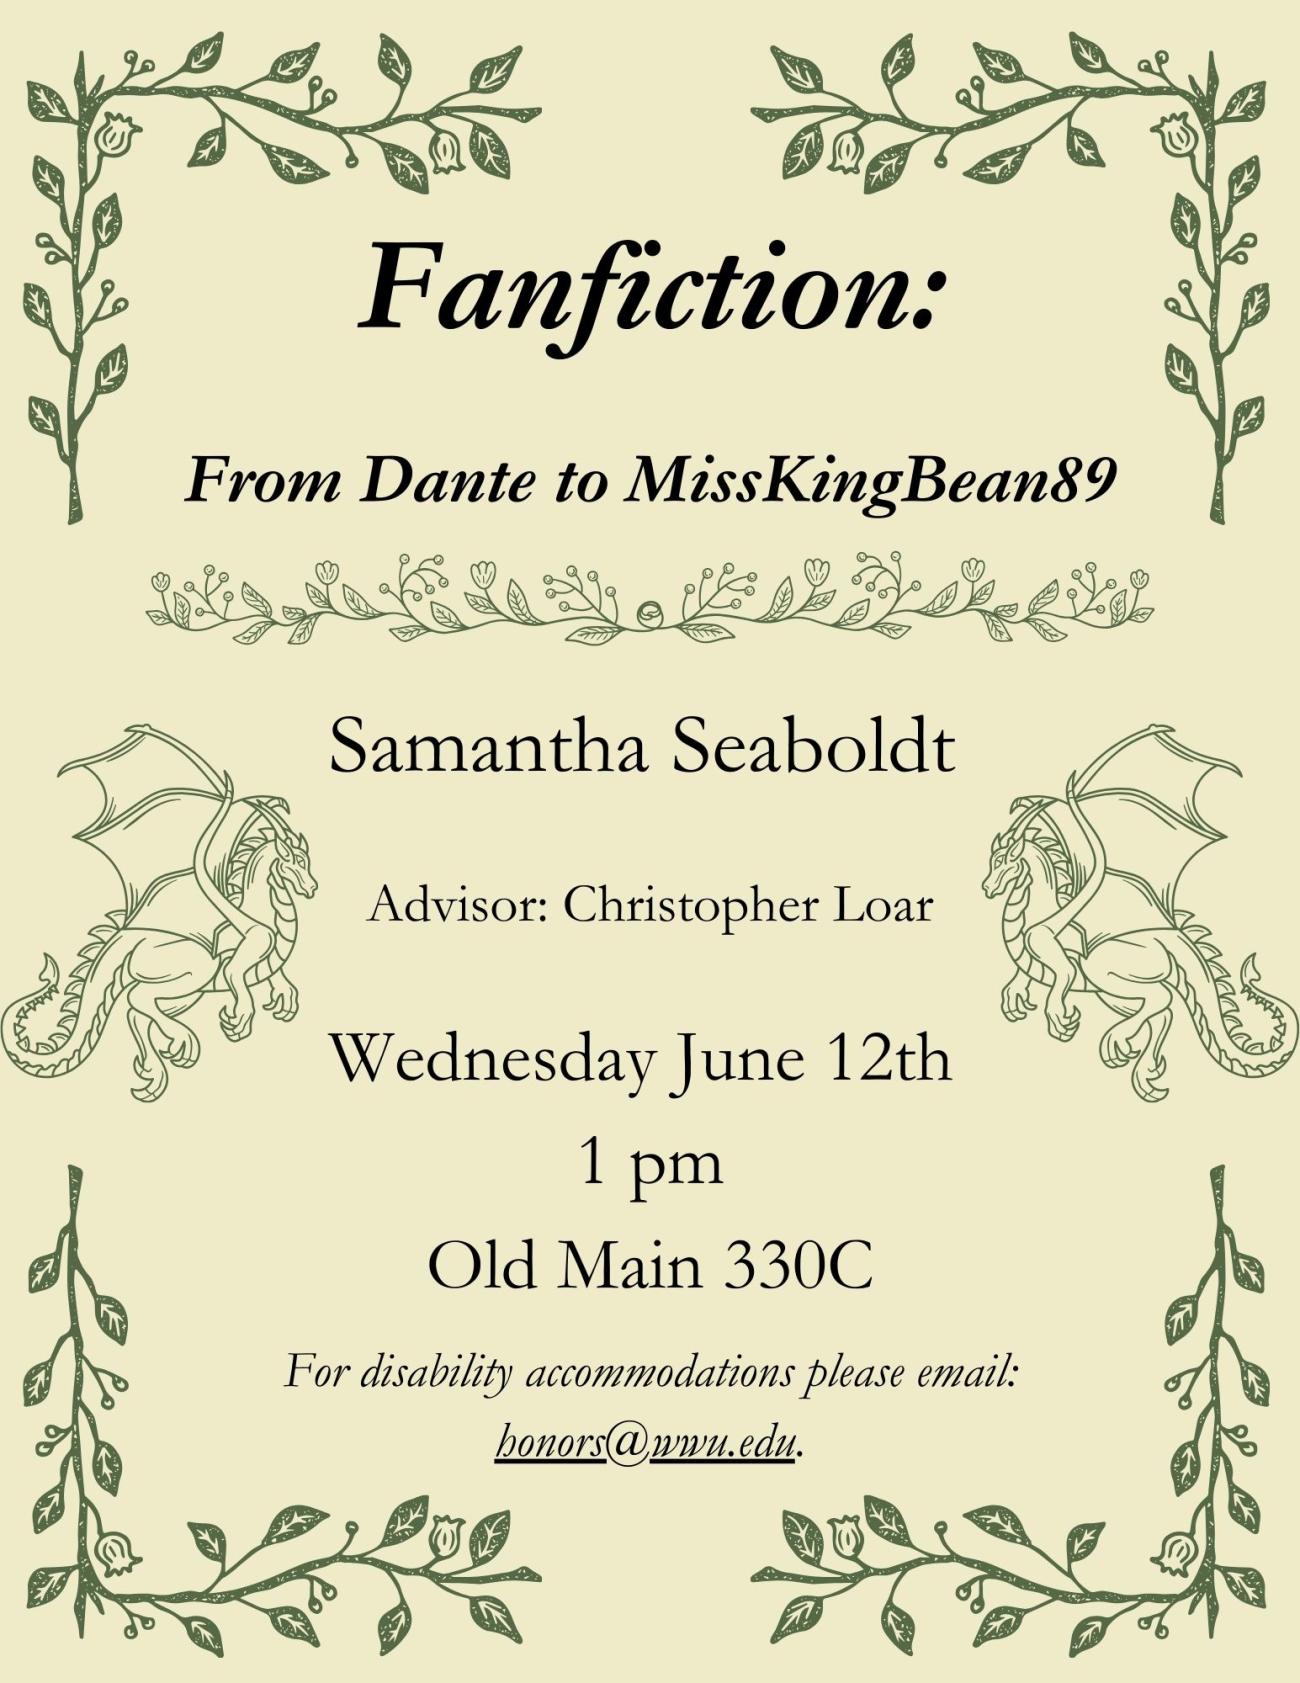 The poster has a solid yellow background with corners bordered with green leaves and flowers. On both sides of the text there are outlines of dragons in green. The text reads “Fanfiction: From Dante to MissKingBean89, Samantha Seaboldt, Advisor: Christopher Loar, Wednesday June 12th 1 pm Old Main 330C, For disability accommodations please email: honors@wwu.edu.” Title and disability information are italicized to draw attention.